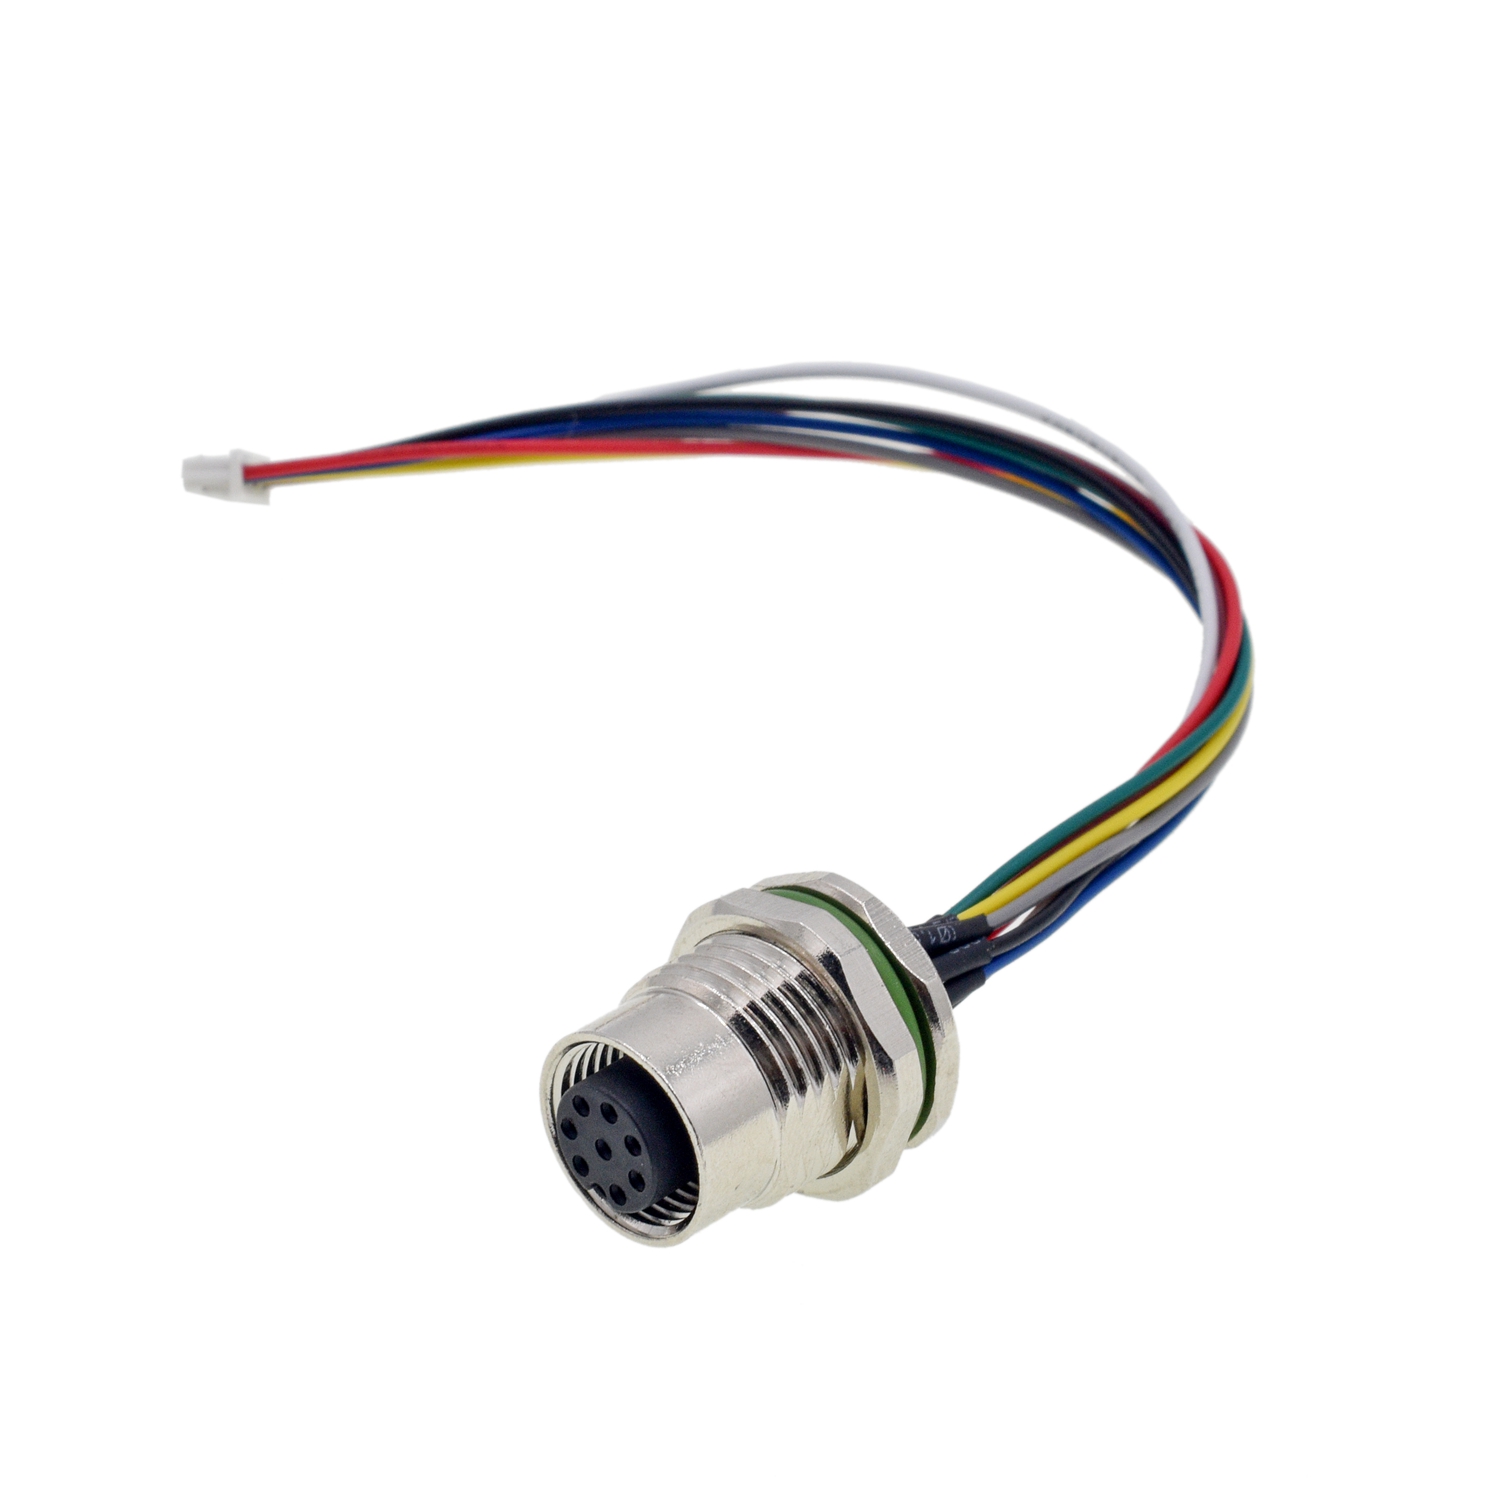 Cost-effective M12 5 Pin Connector Cable Assembly